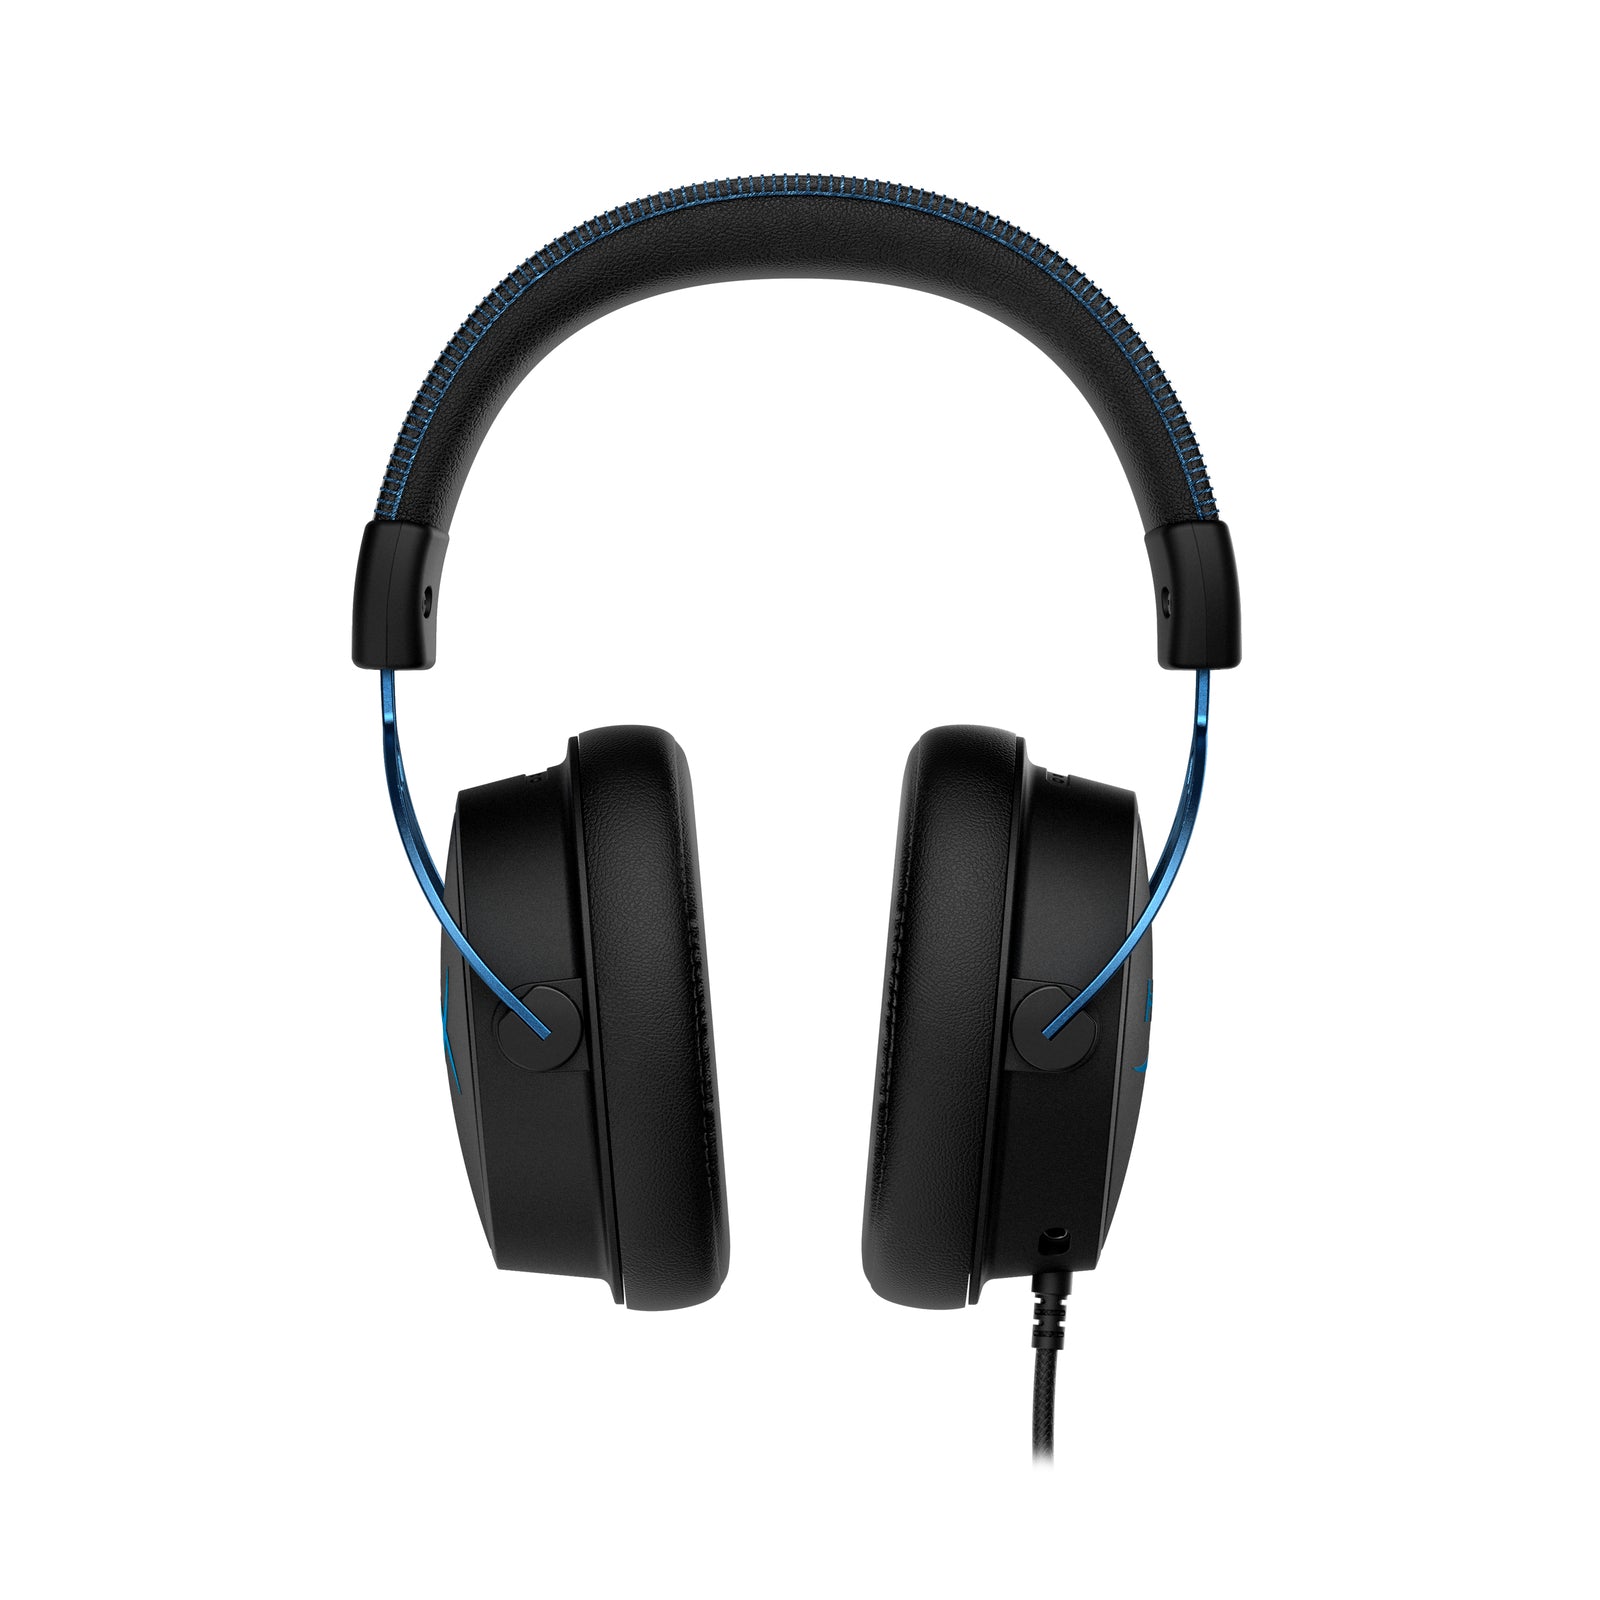 Cloud Alpha S – USB Gaming Headset with 7.1 Surround Sound ...